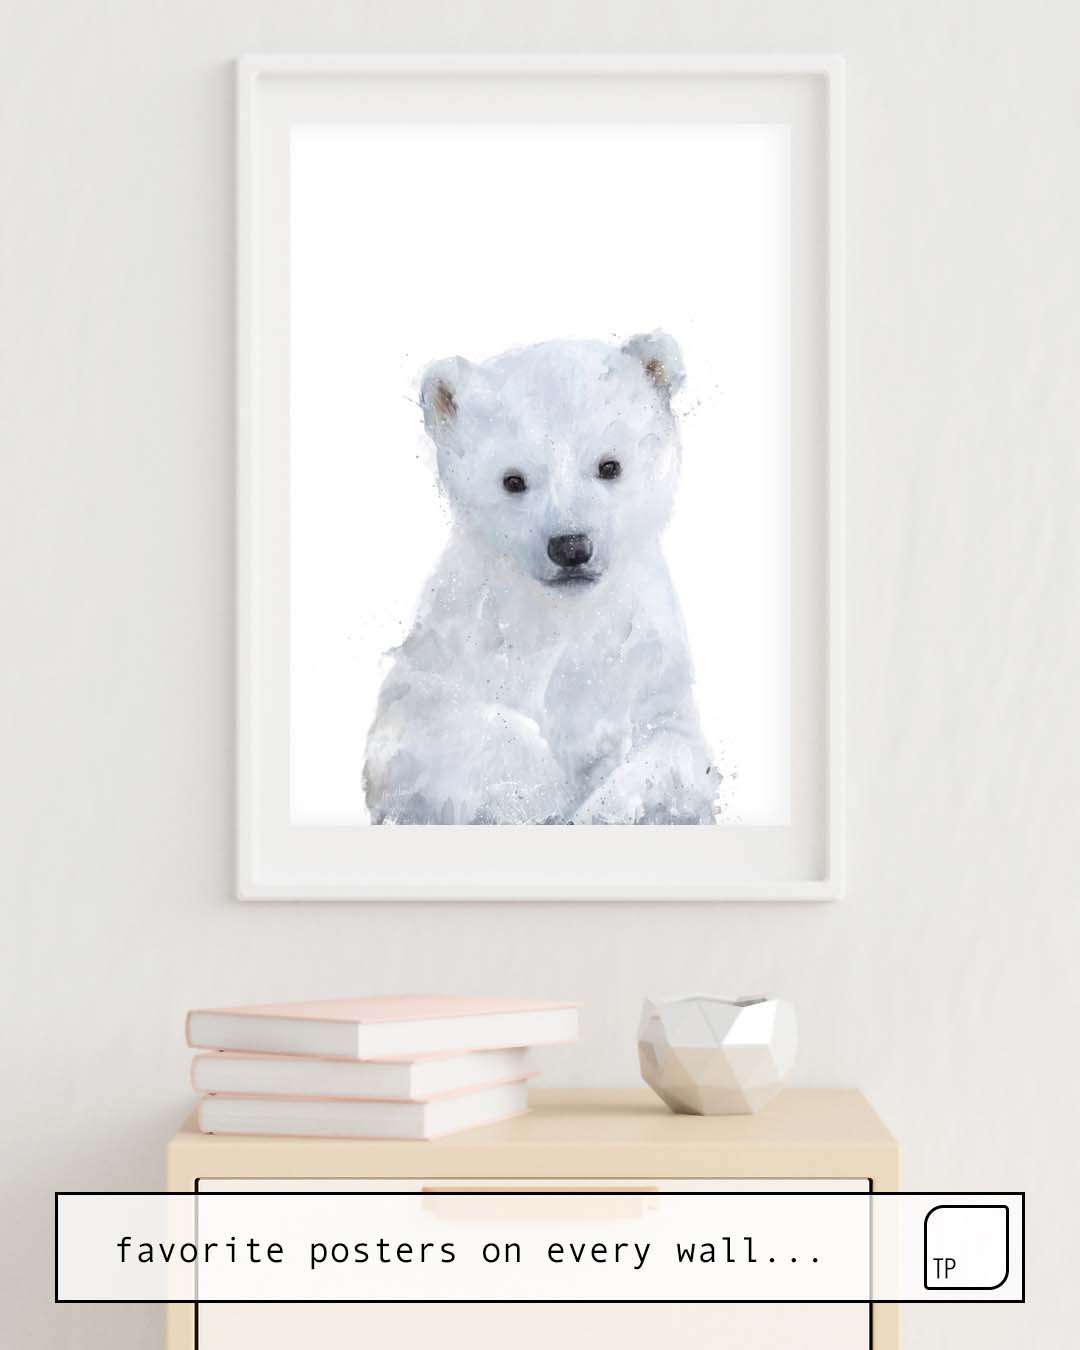 The photo shows an example of furnishing with the motif LITTLE POLAR BEAR by Amy Hamilton as mural